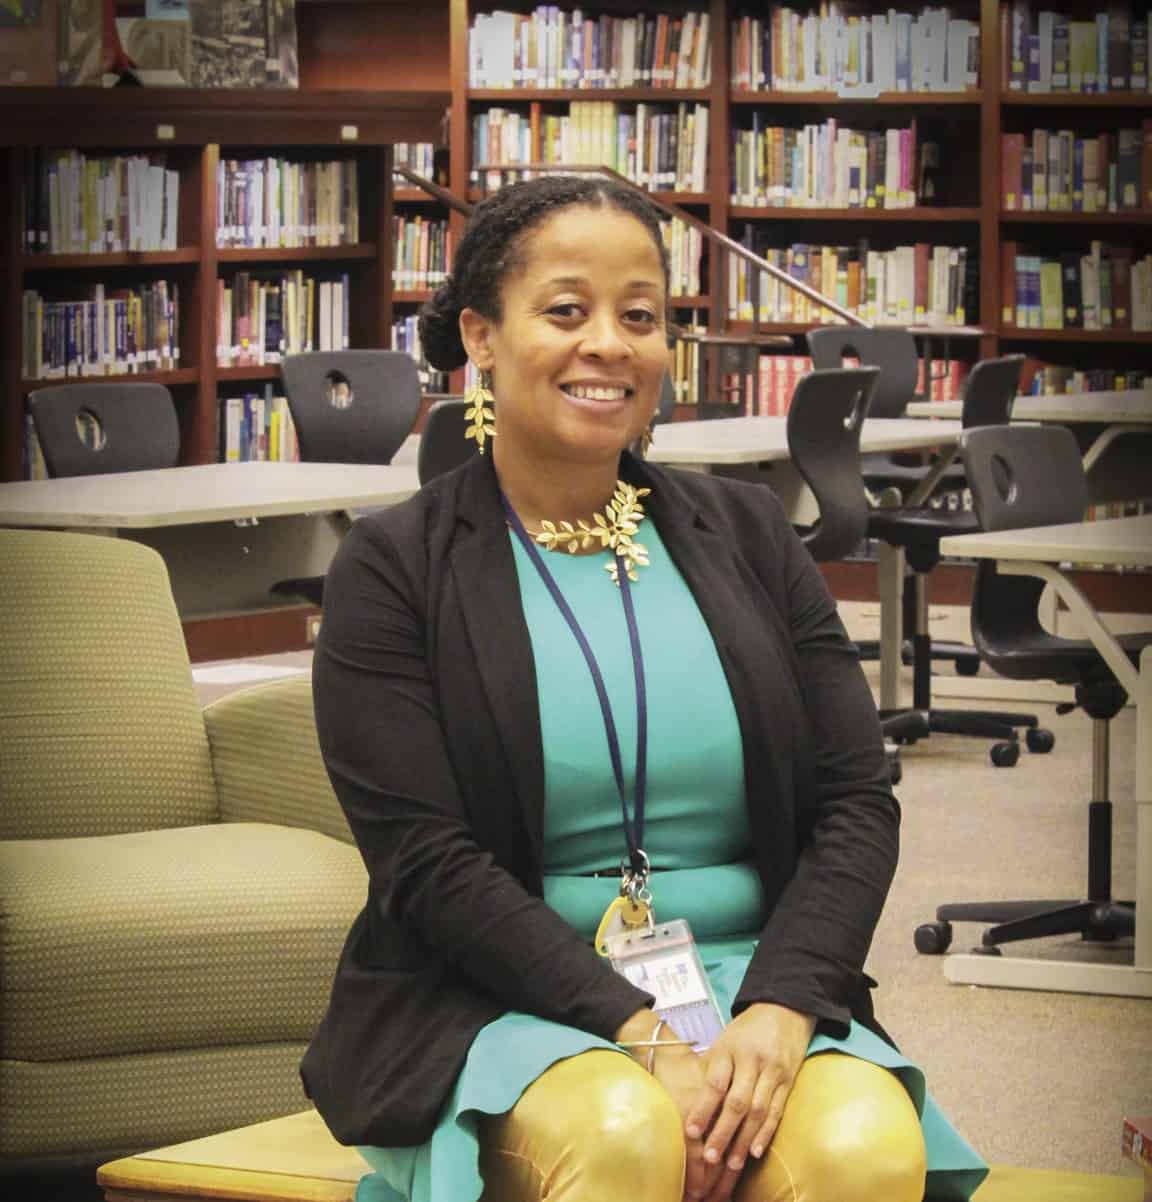 New Librarian Shines On!